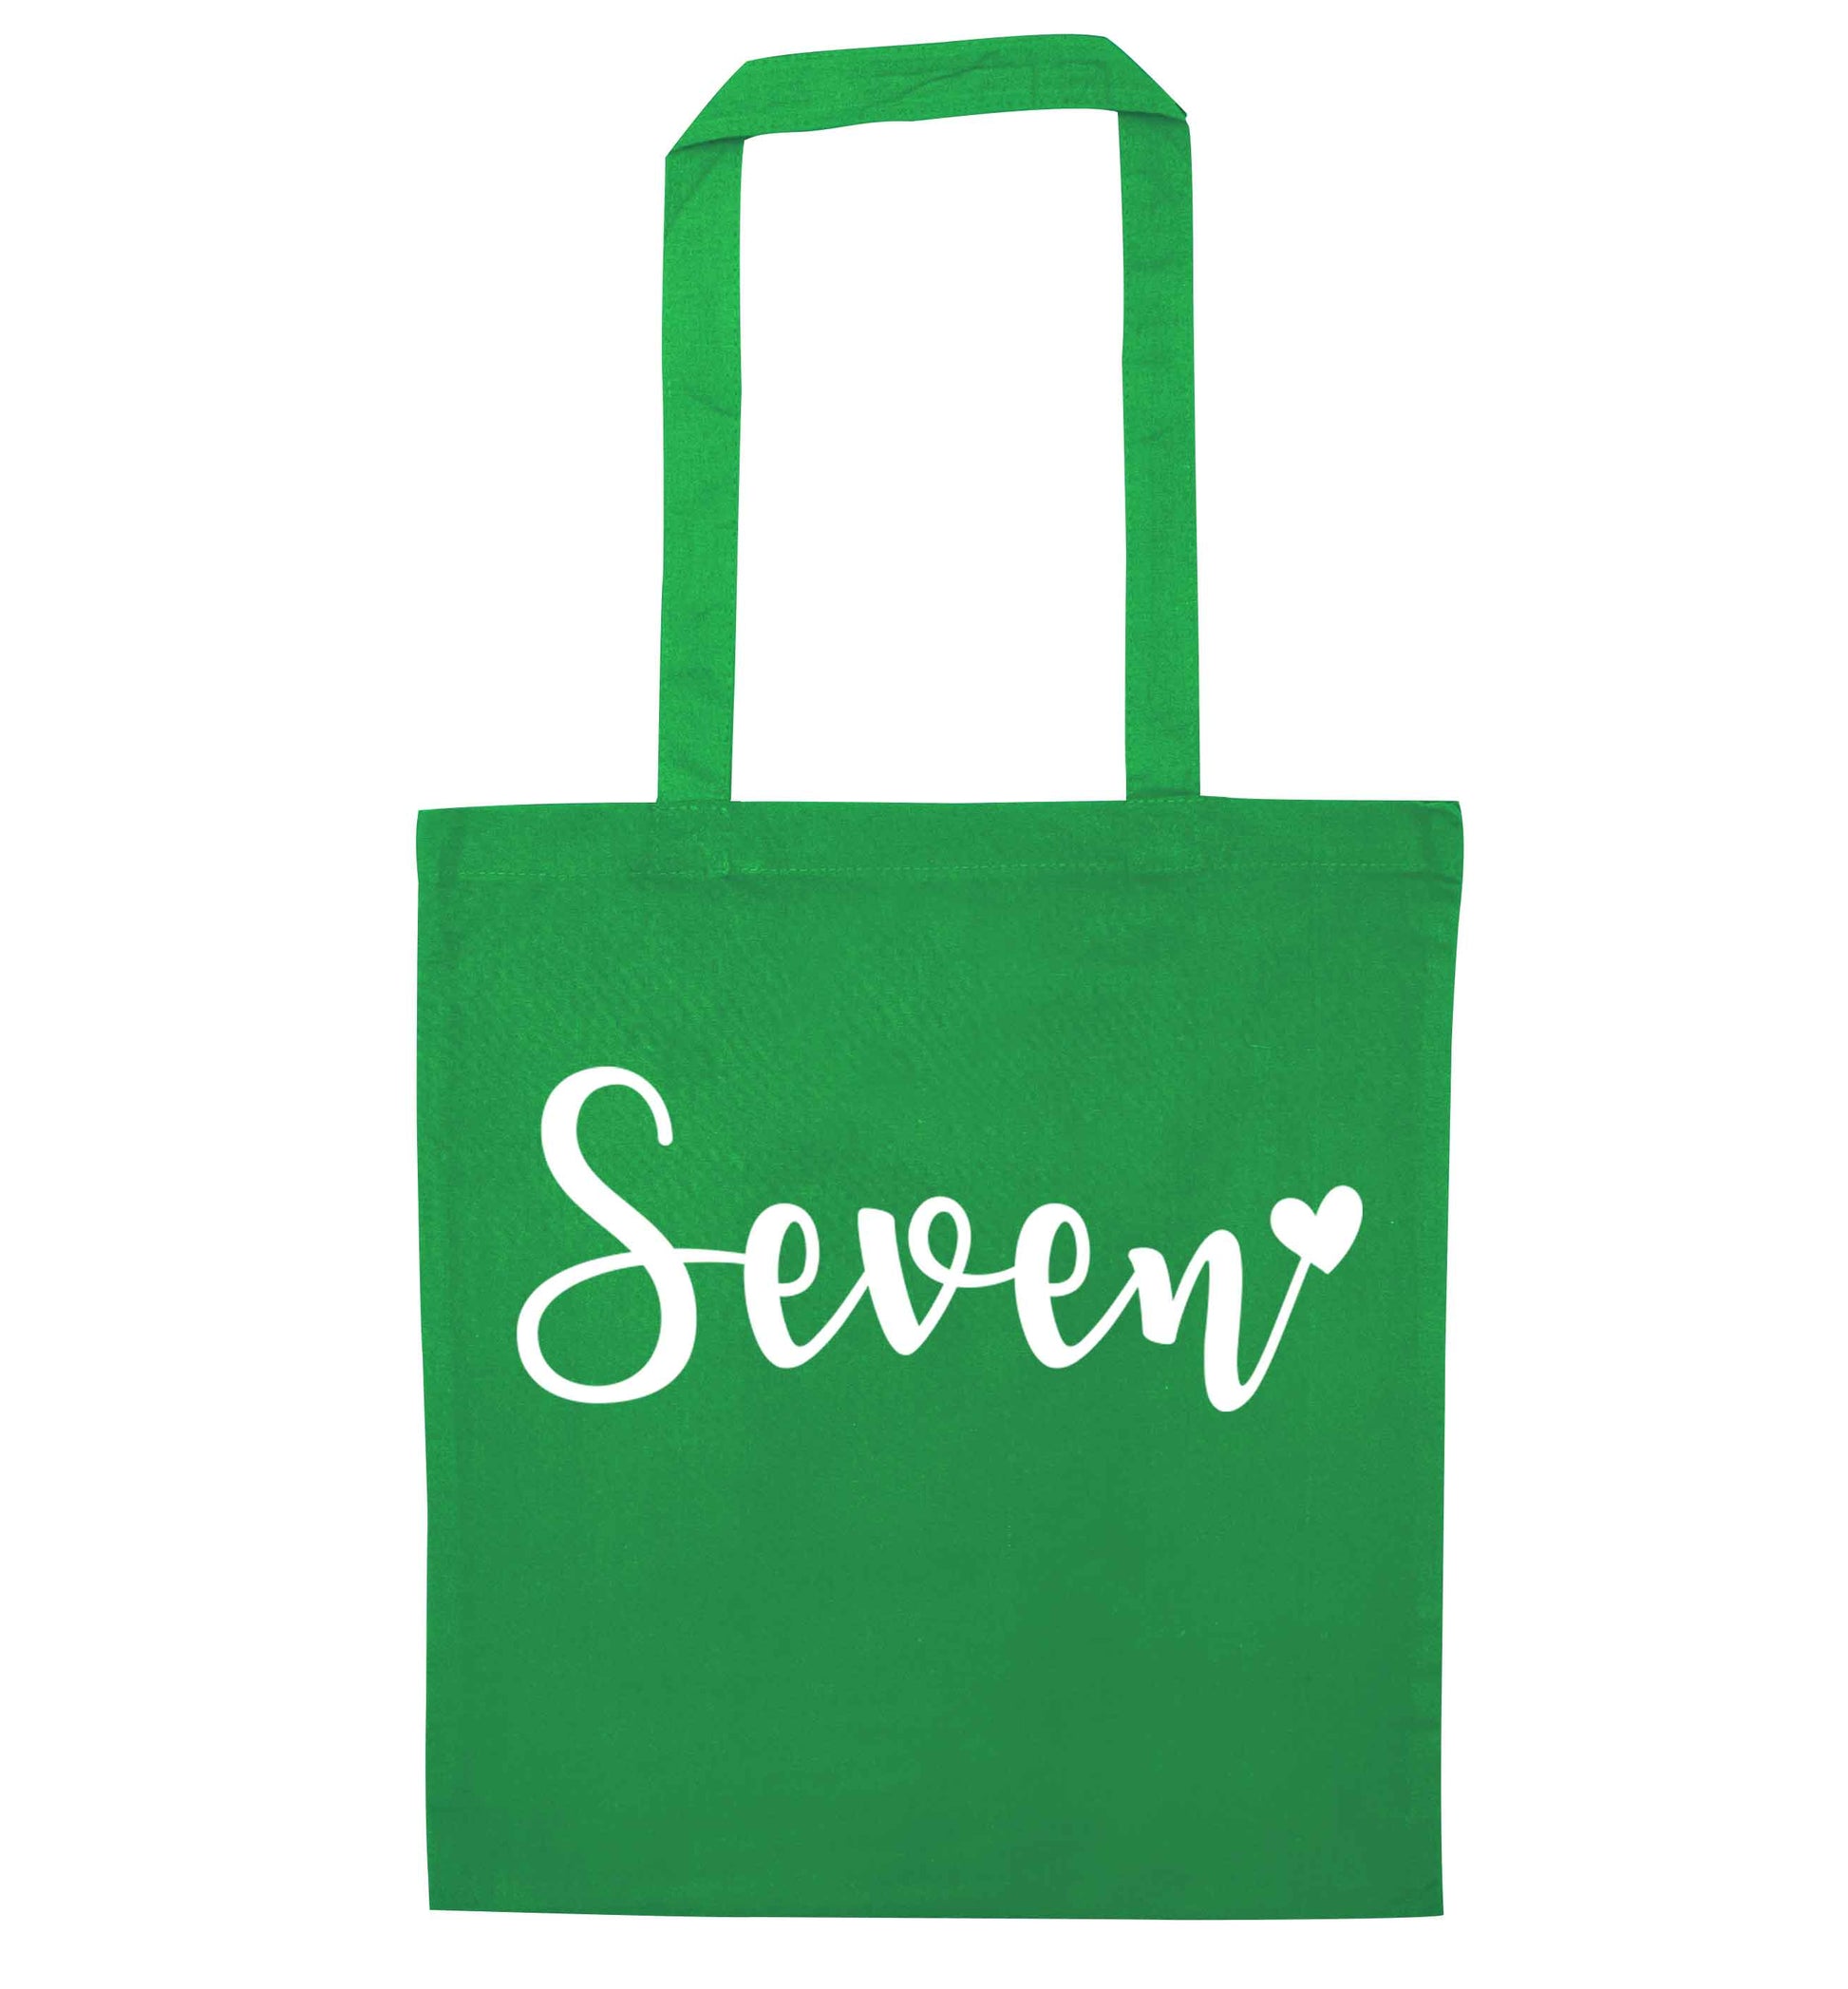 Seven and heart green tote bag